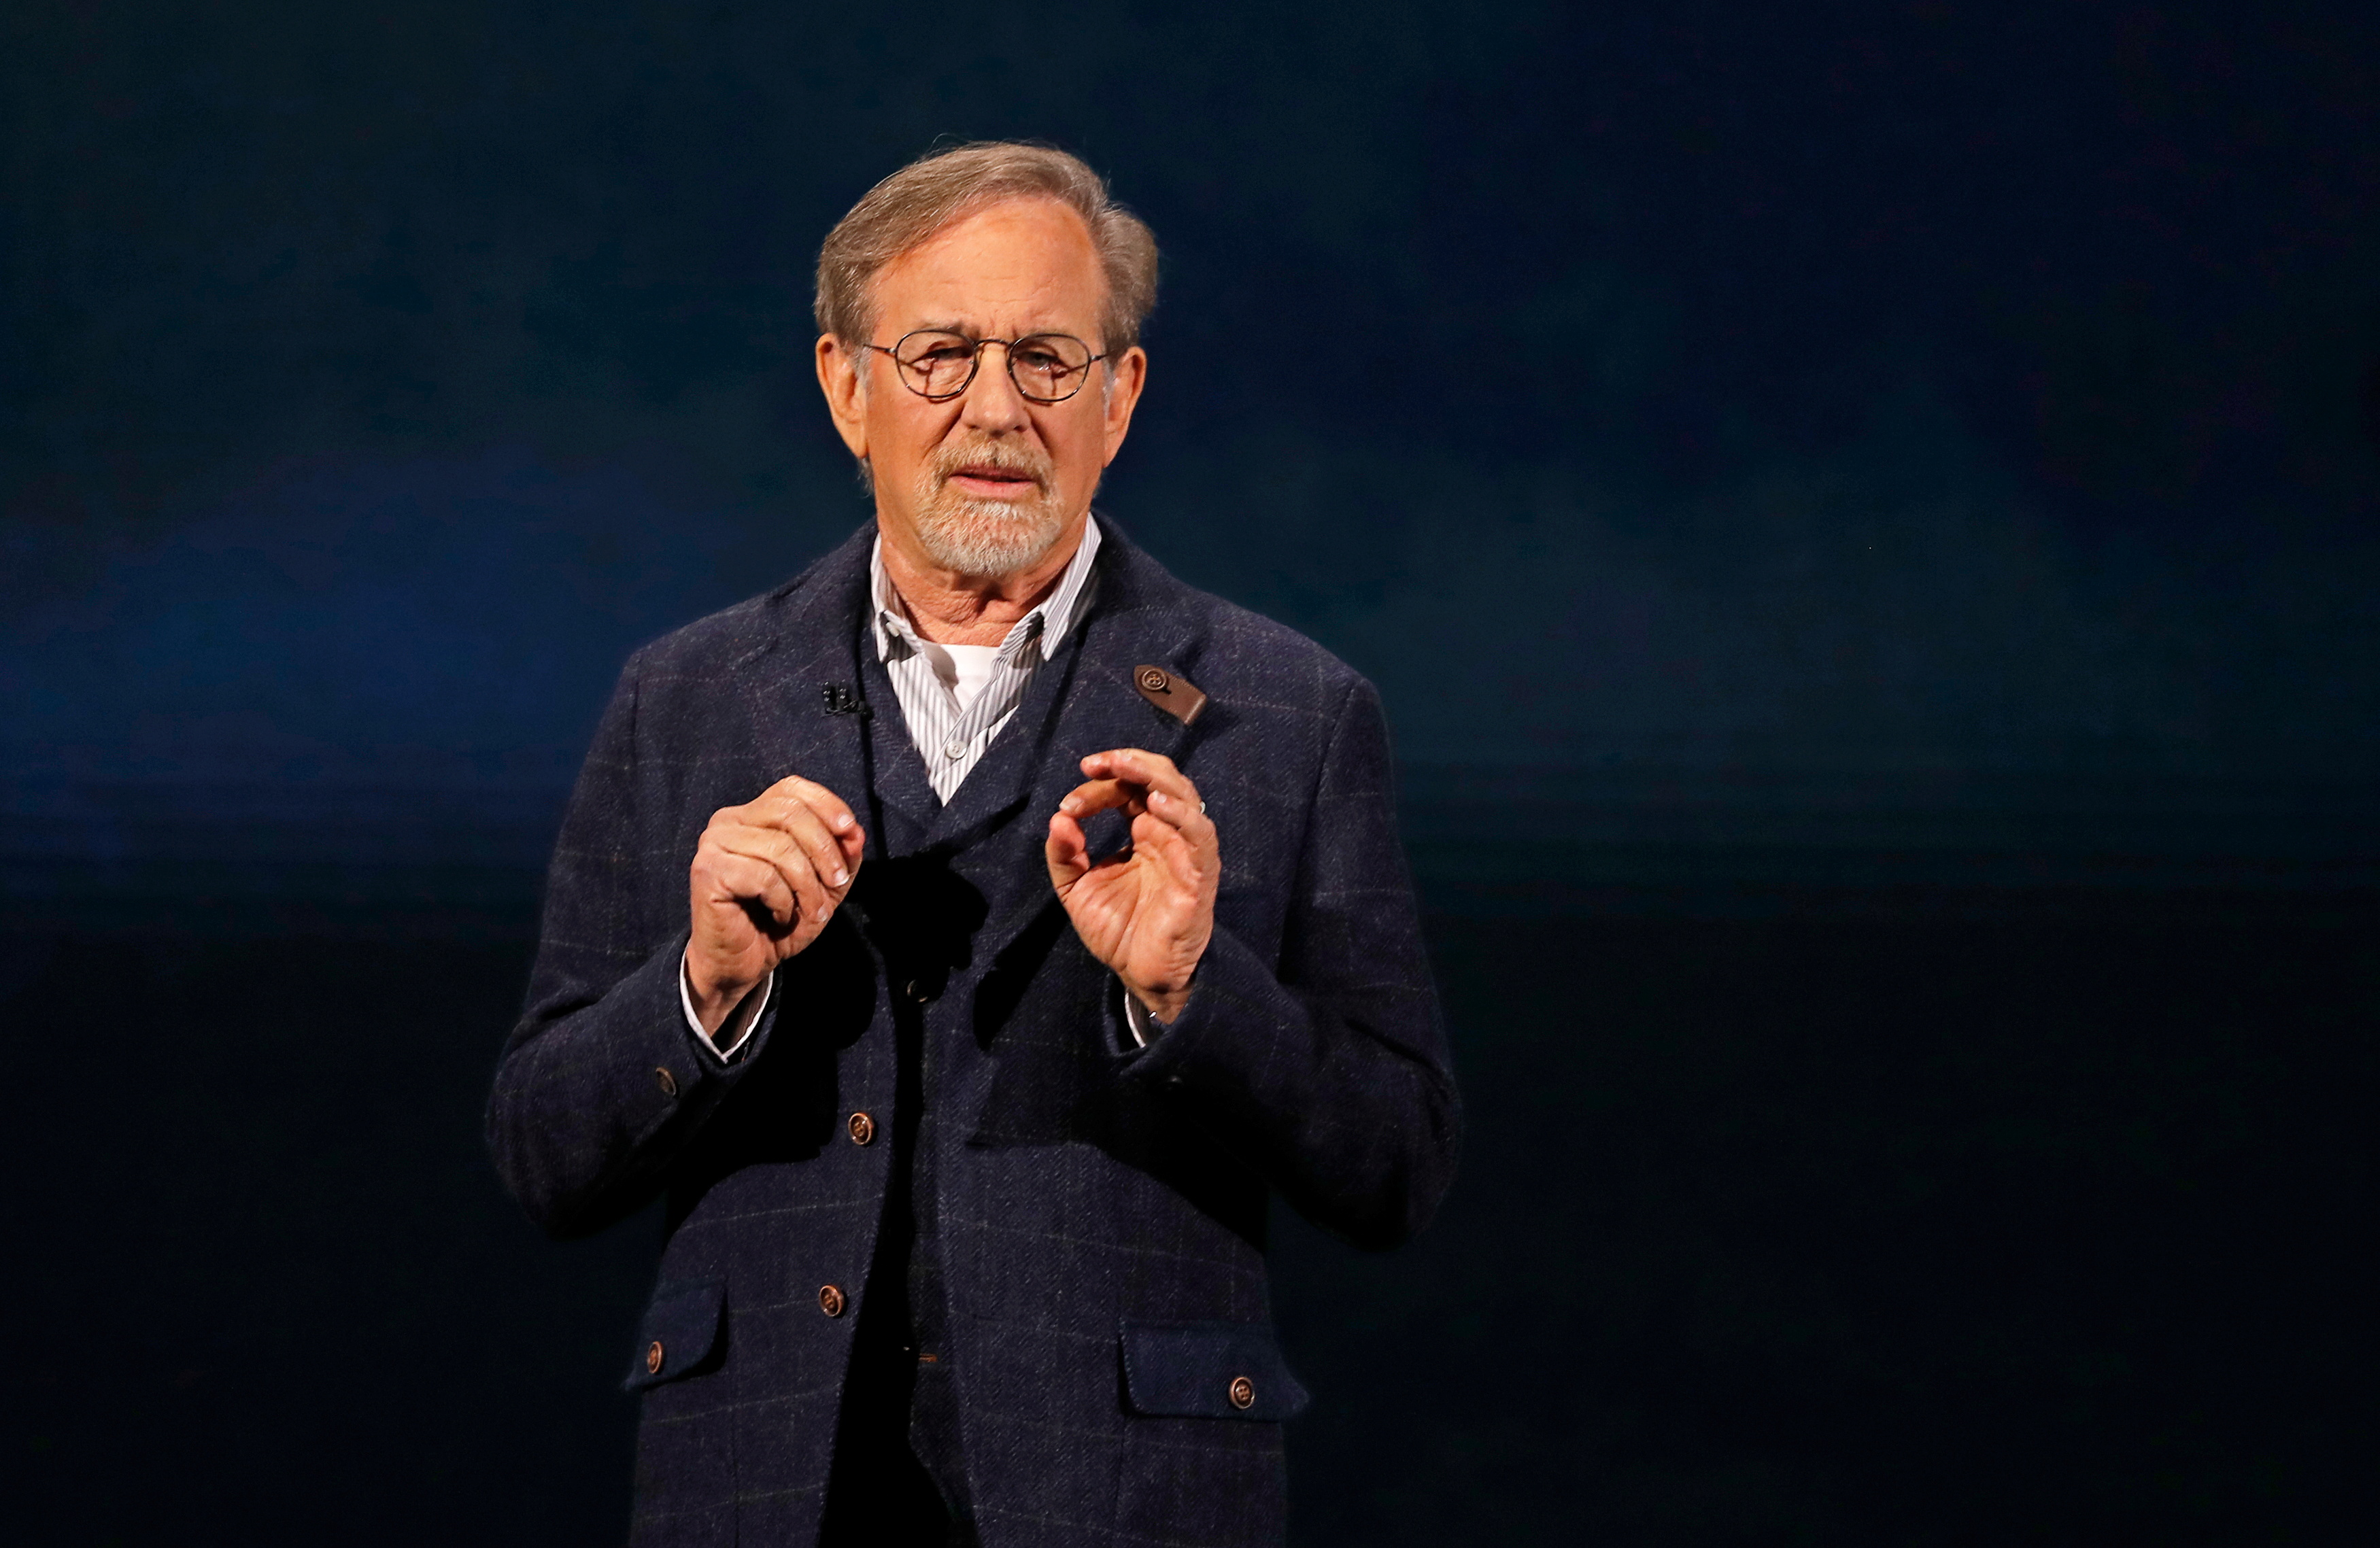 Director Steven Spielberg speaks during an Apple special event at the Steve Jobs Theater in Cupertino, California, U.S., March 25, 2019. REUTERS/Stephen Lam